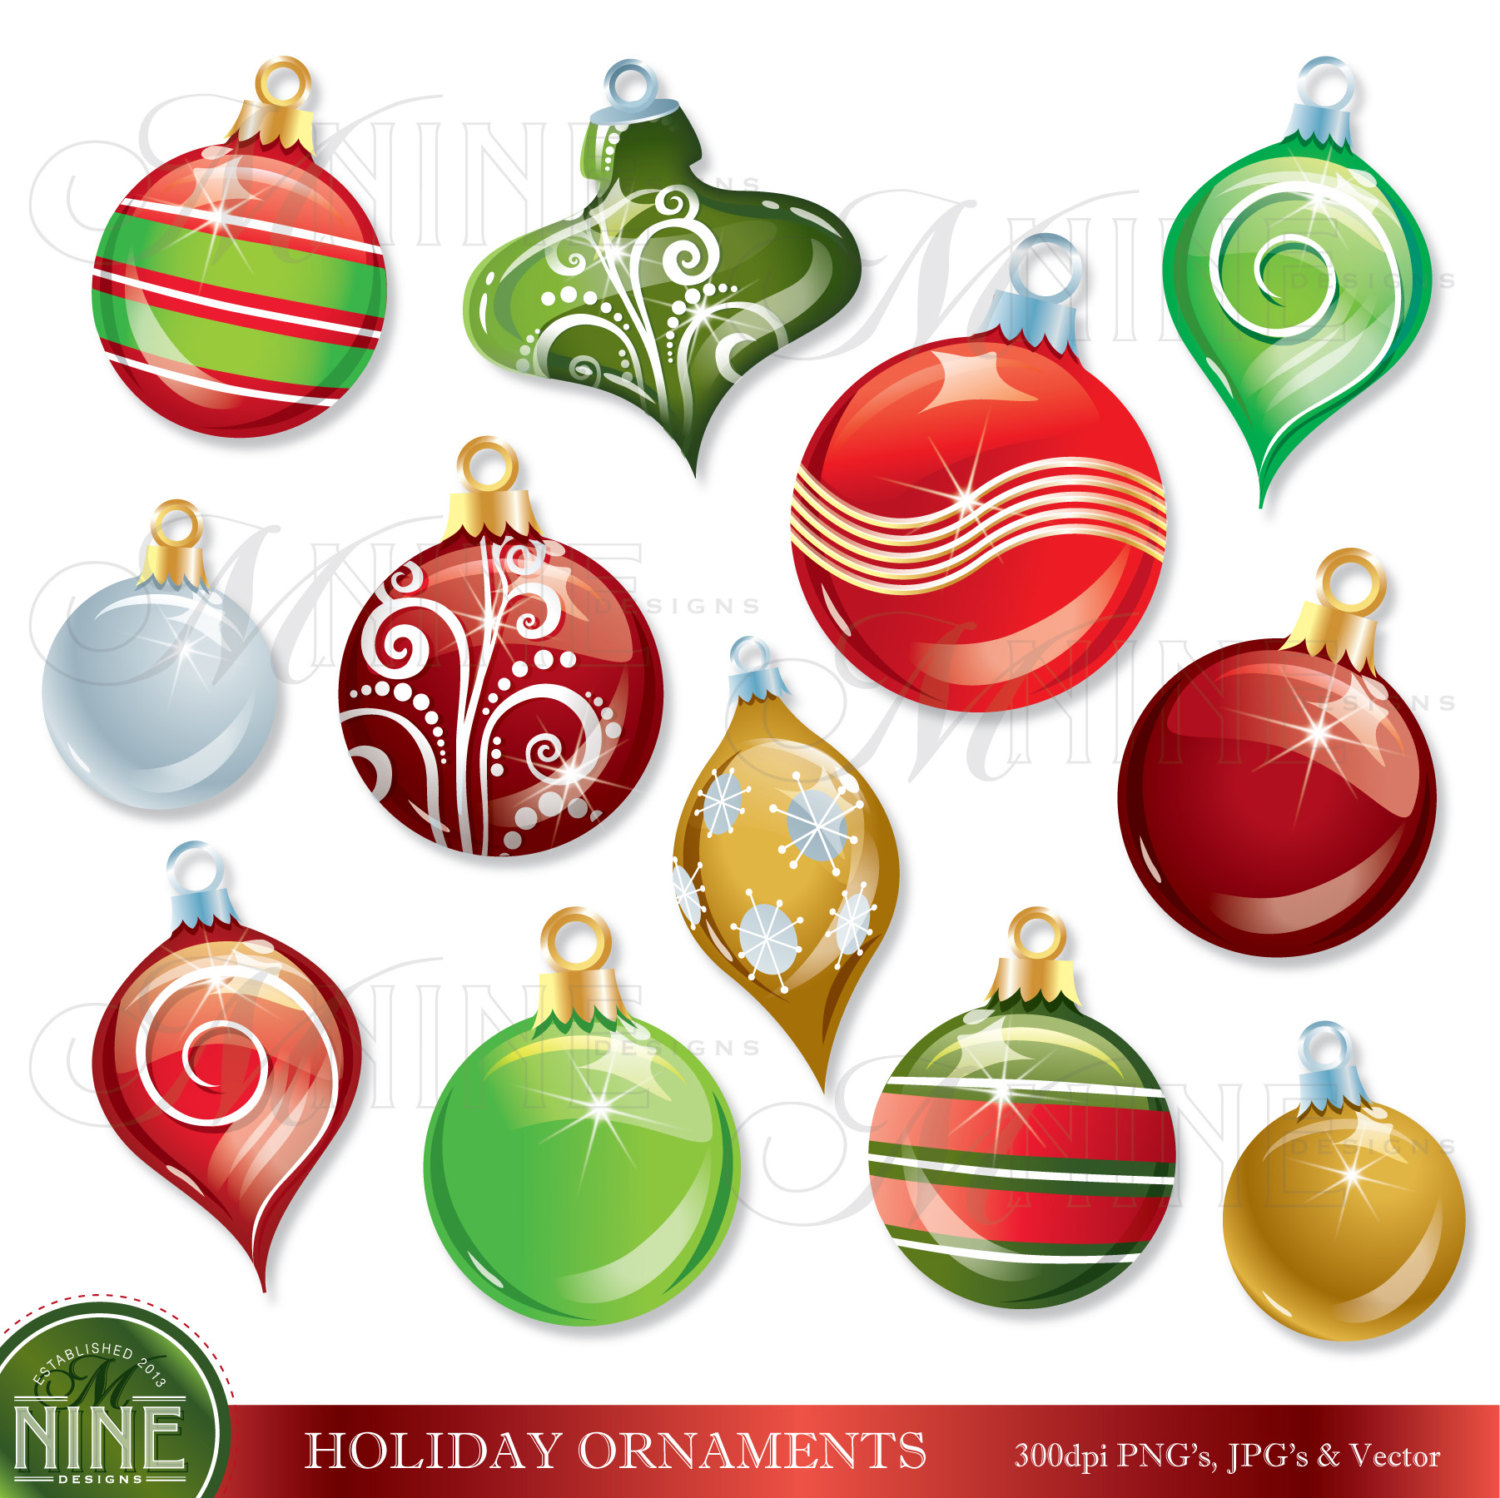 CHRISTMAS ORNAMENTS Clip Art: HOLIDAY Clipart, Instant Download, Ornament Vector Art Icons Graphics